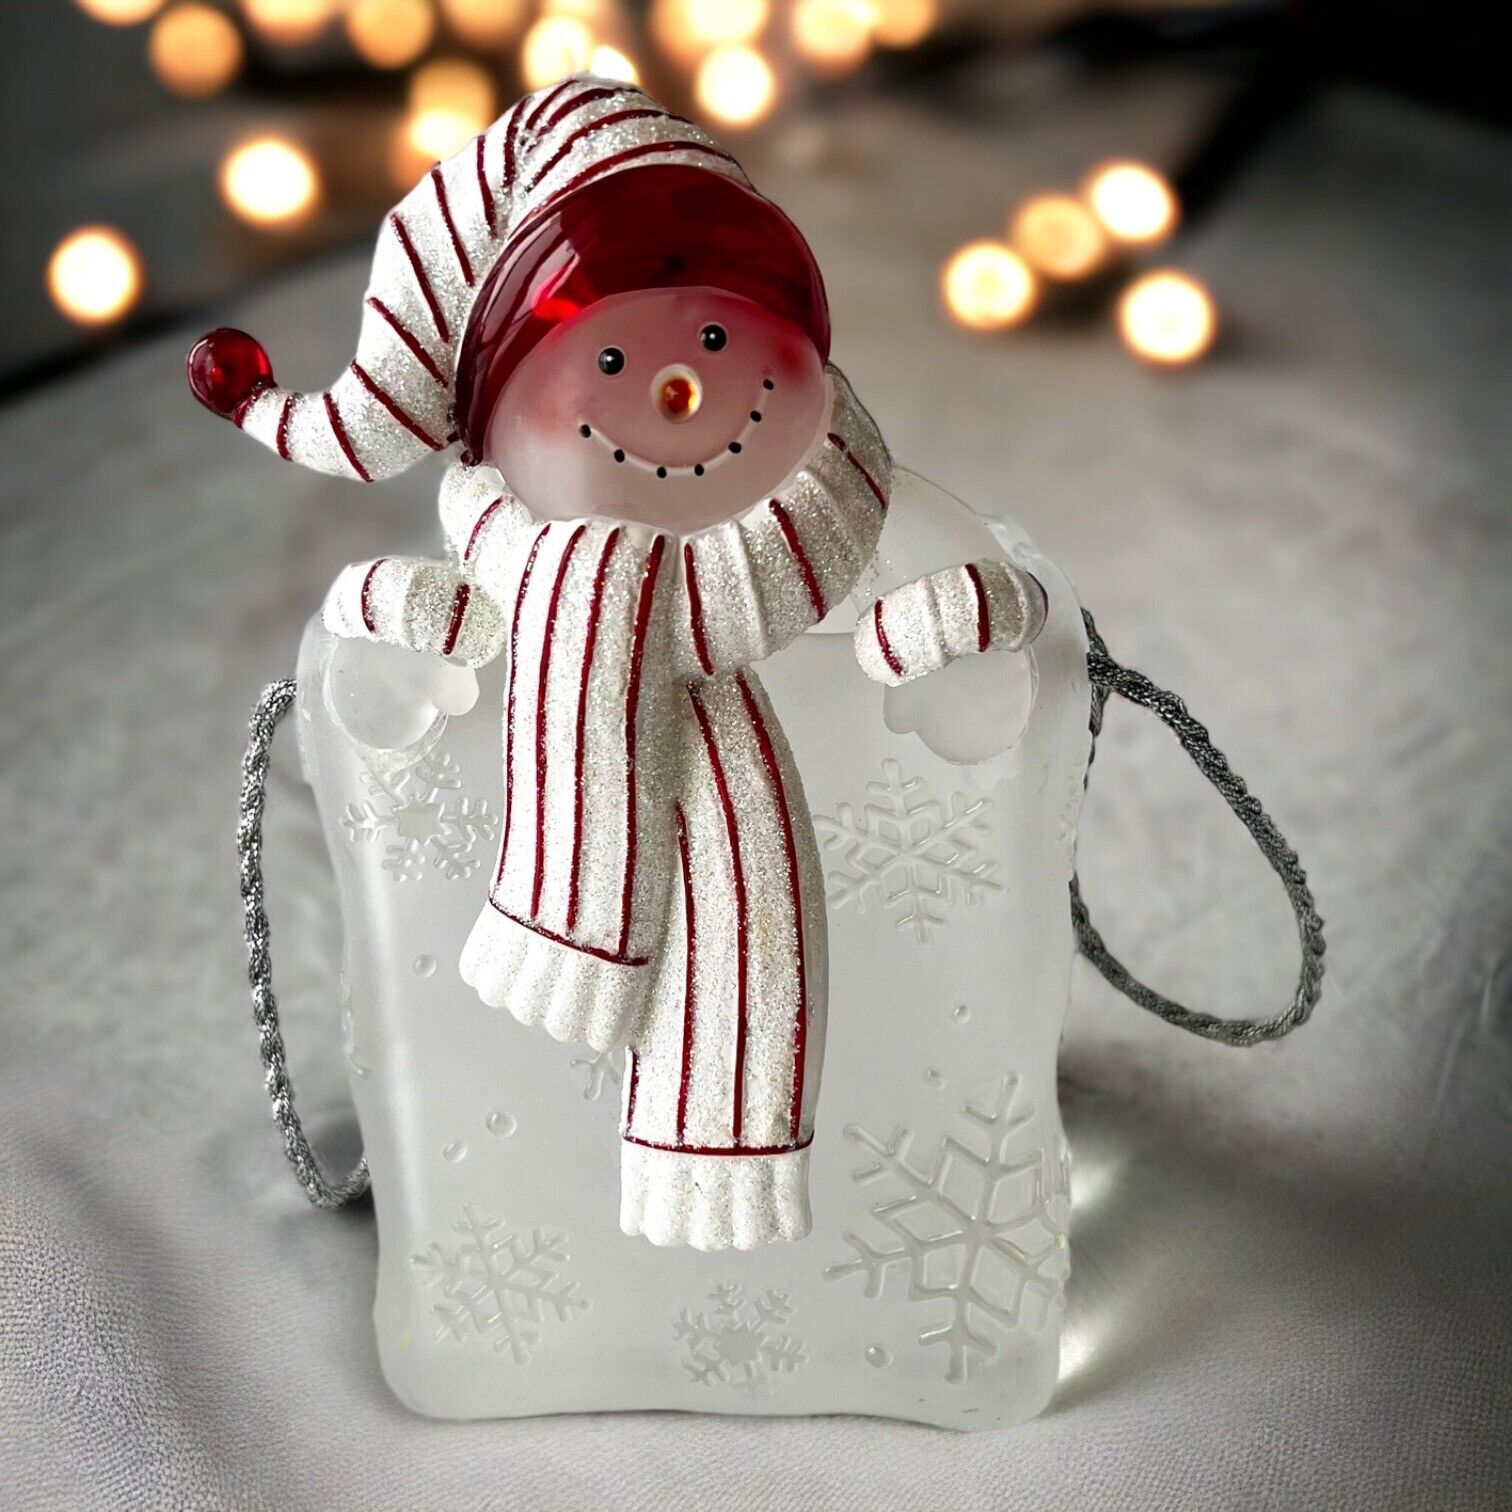 Snowman Frosted Acrylic Christmas Candy Dish Holiday Basket Planter Container